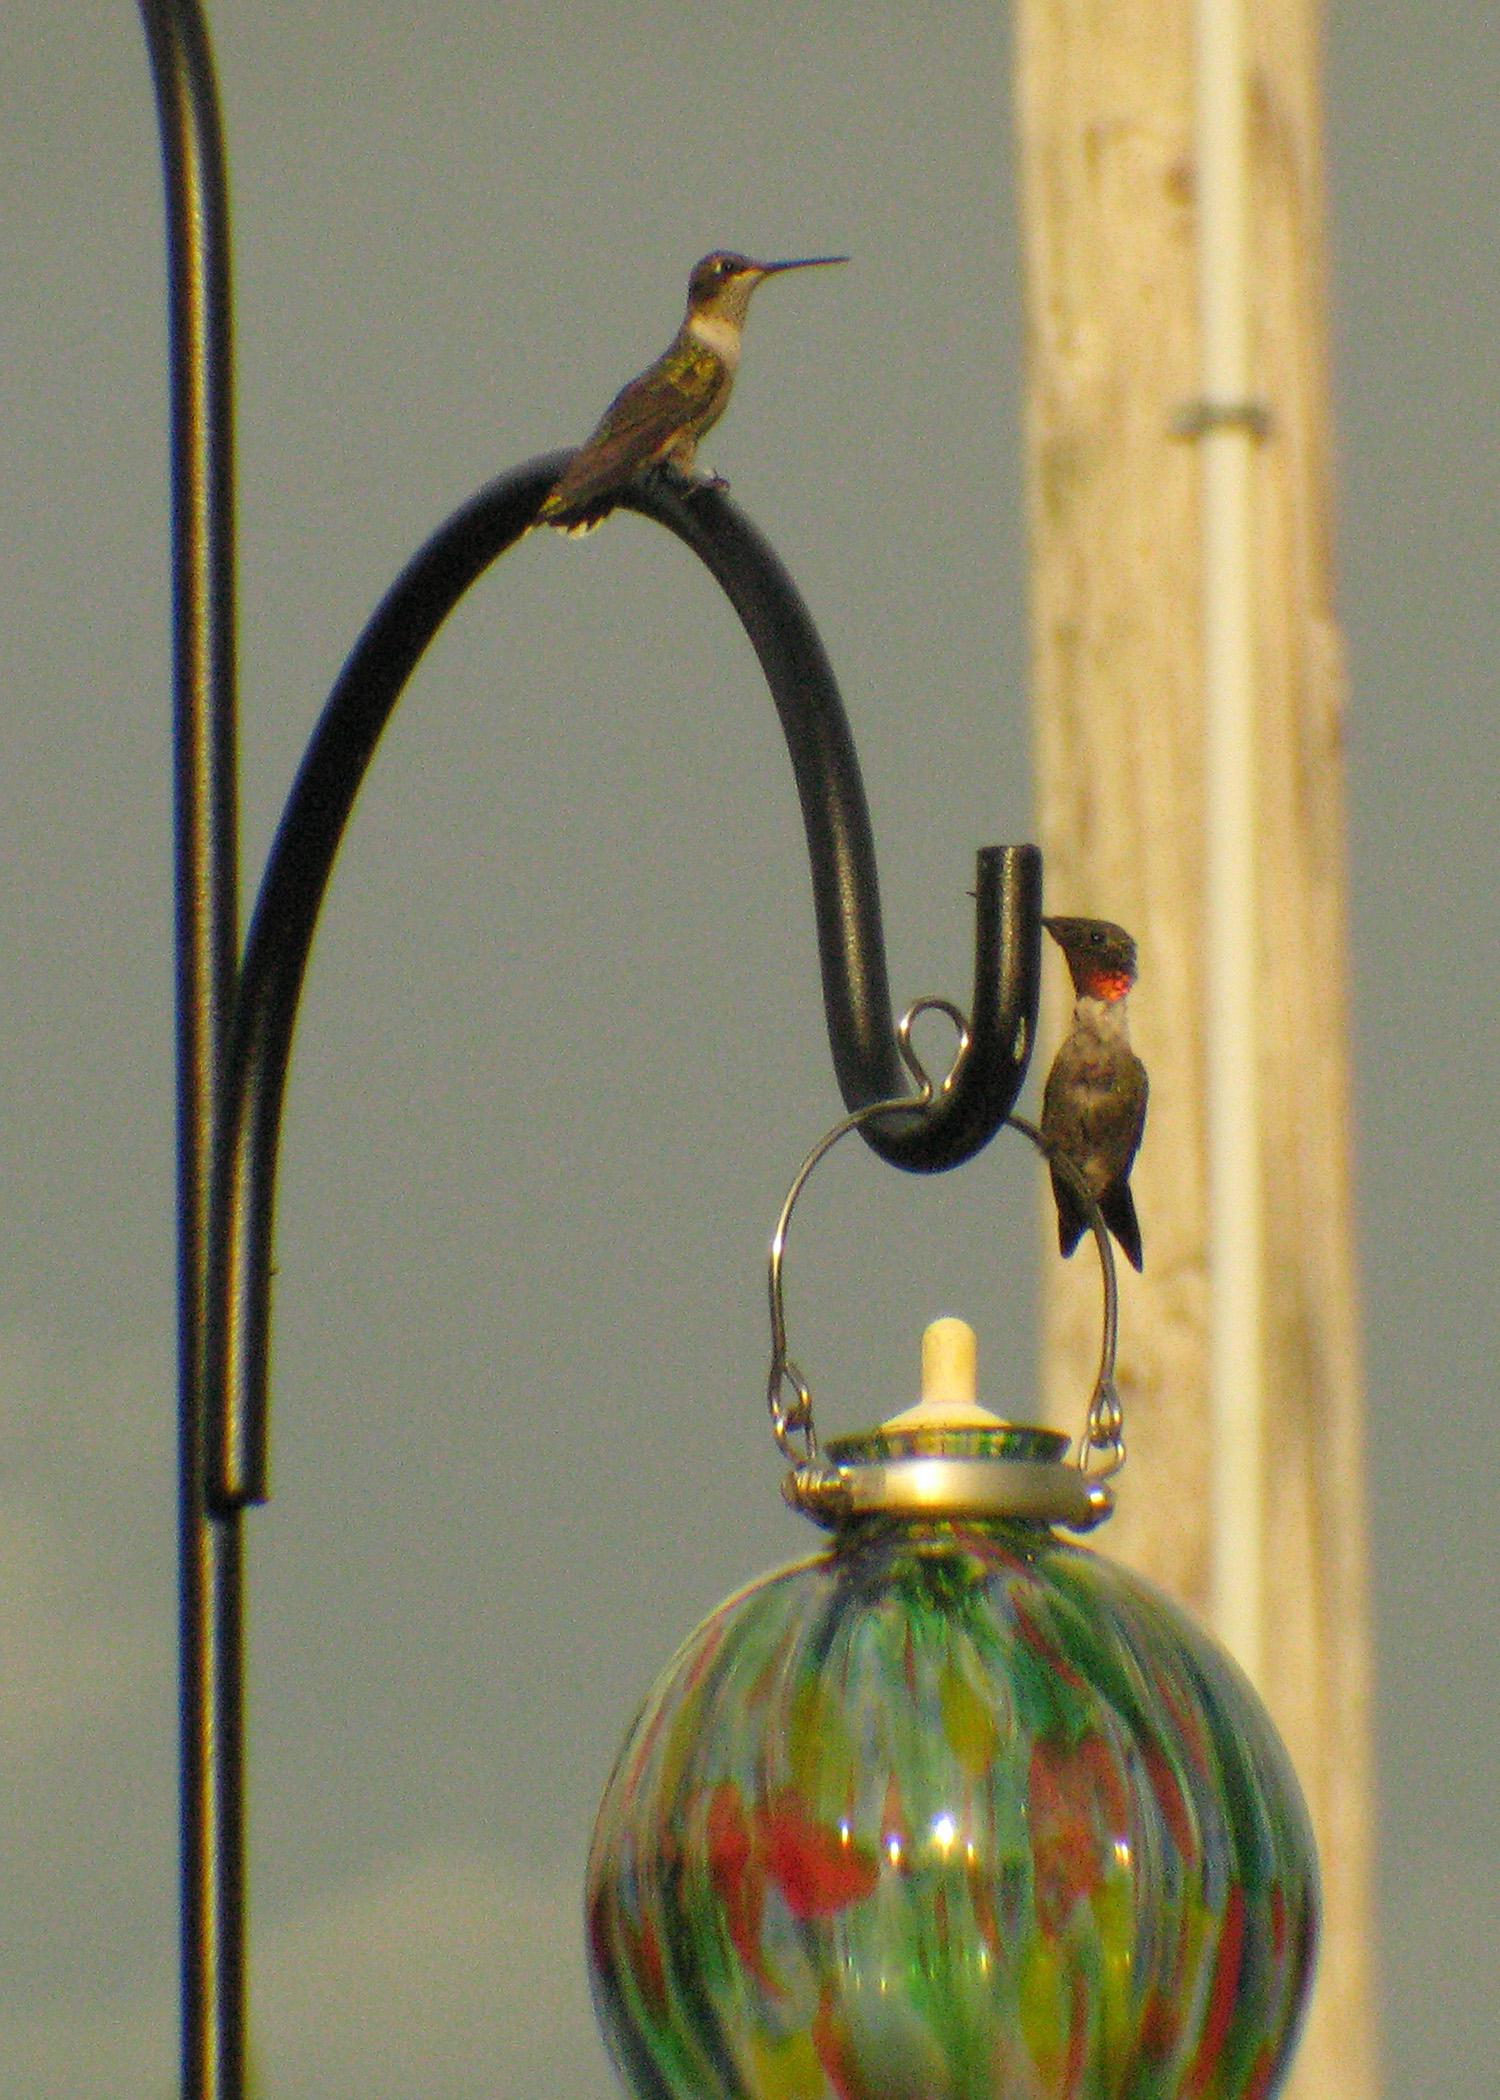 Hummingbirds are responsible for pollinating at least 150 plant species. Many hummingbird enthusiasts hang out feeders from March through November, when the birds migrate south. It is best to leave feeders out until no hummingbirds are seen for two weeks. (Photo by MSU Ag Communications)